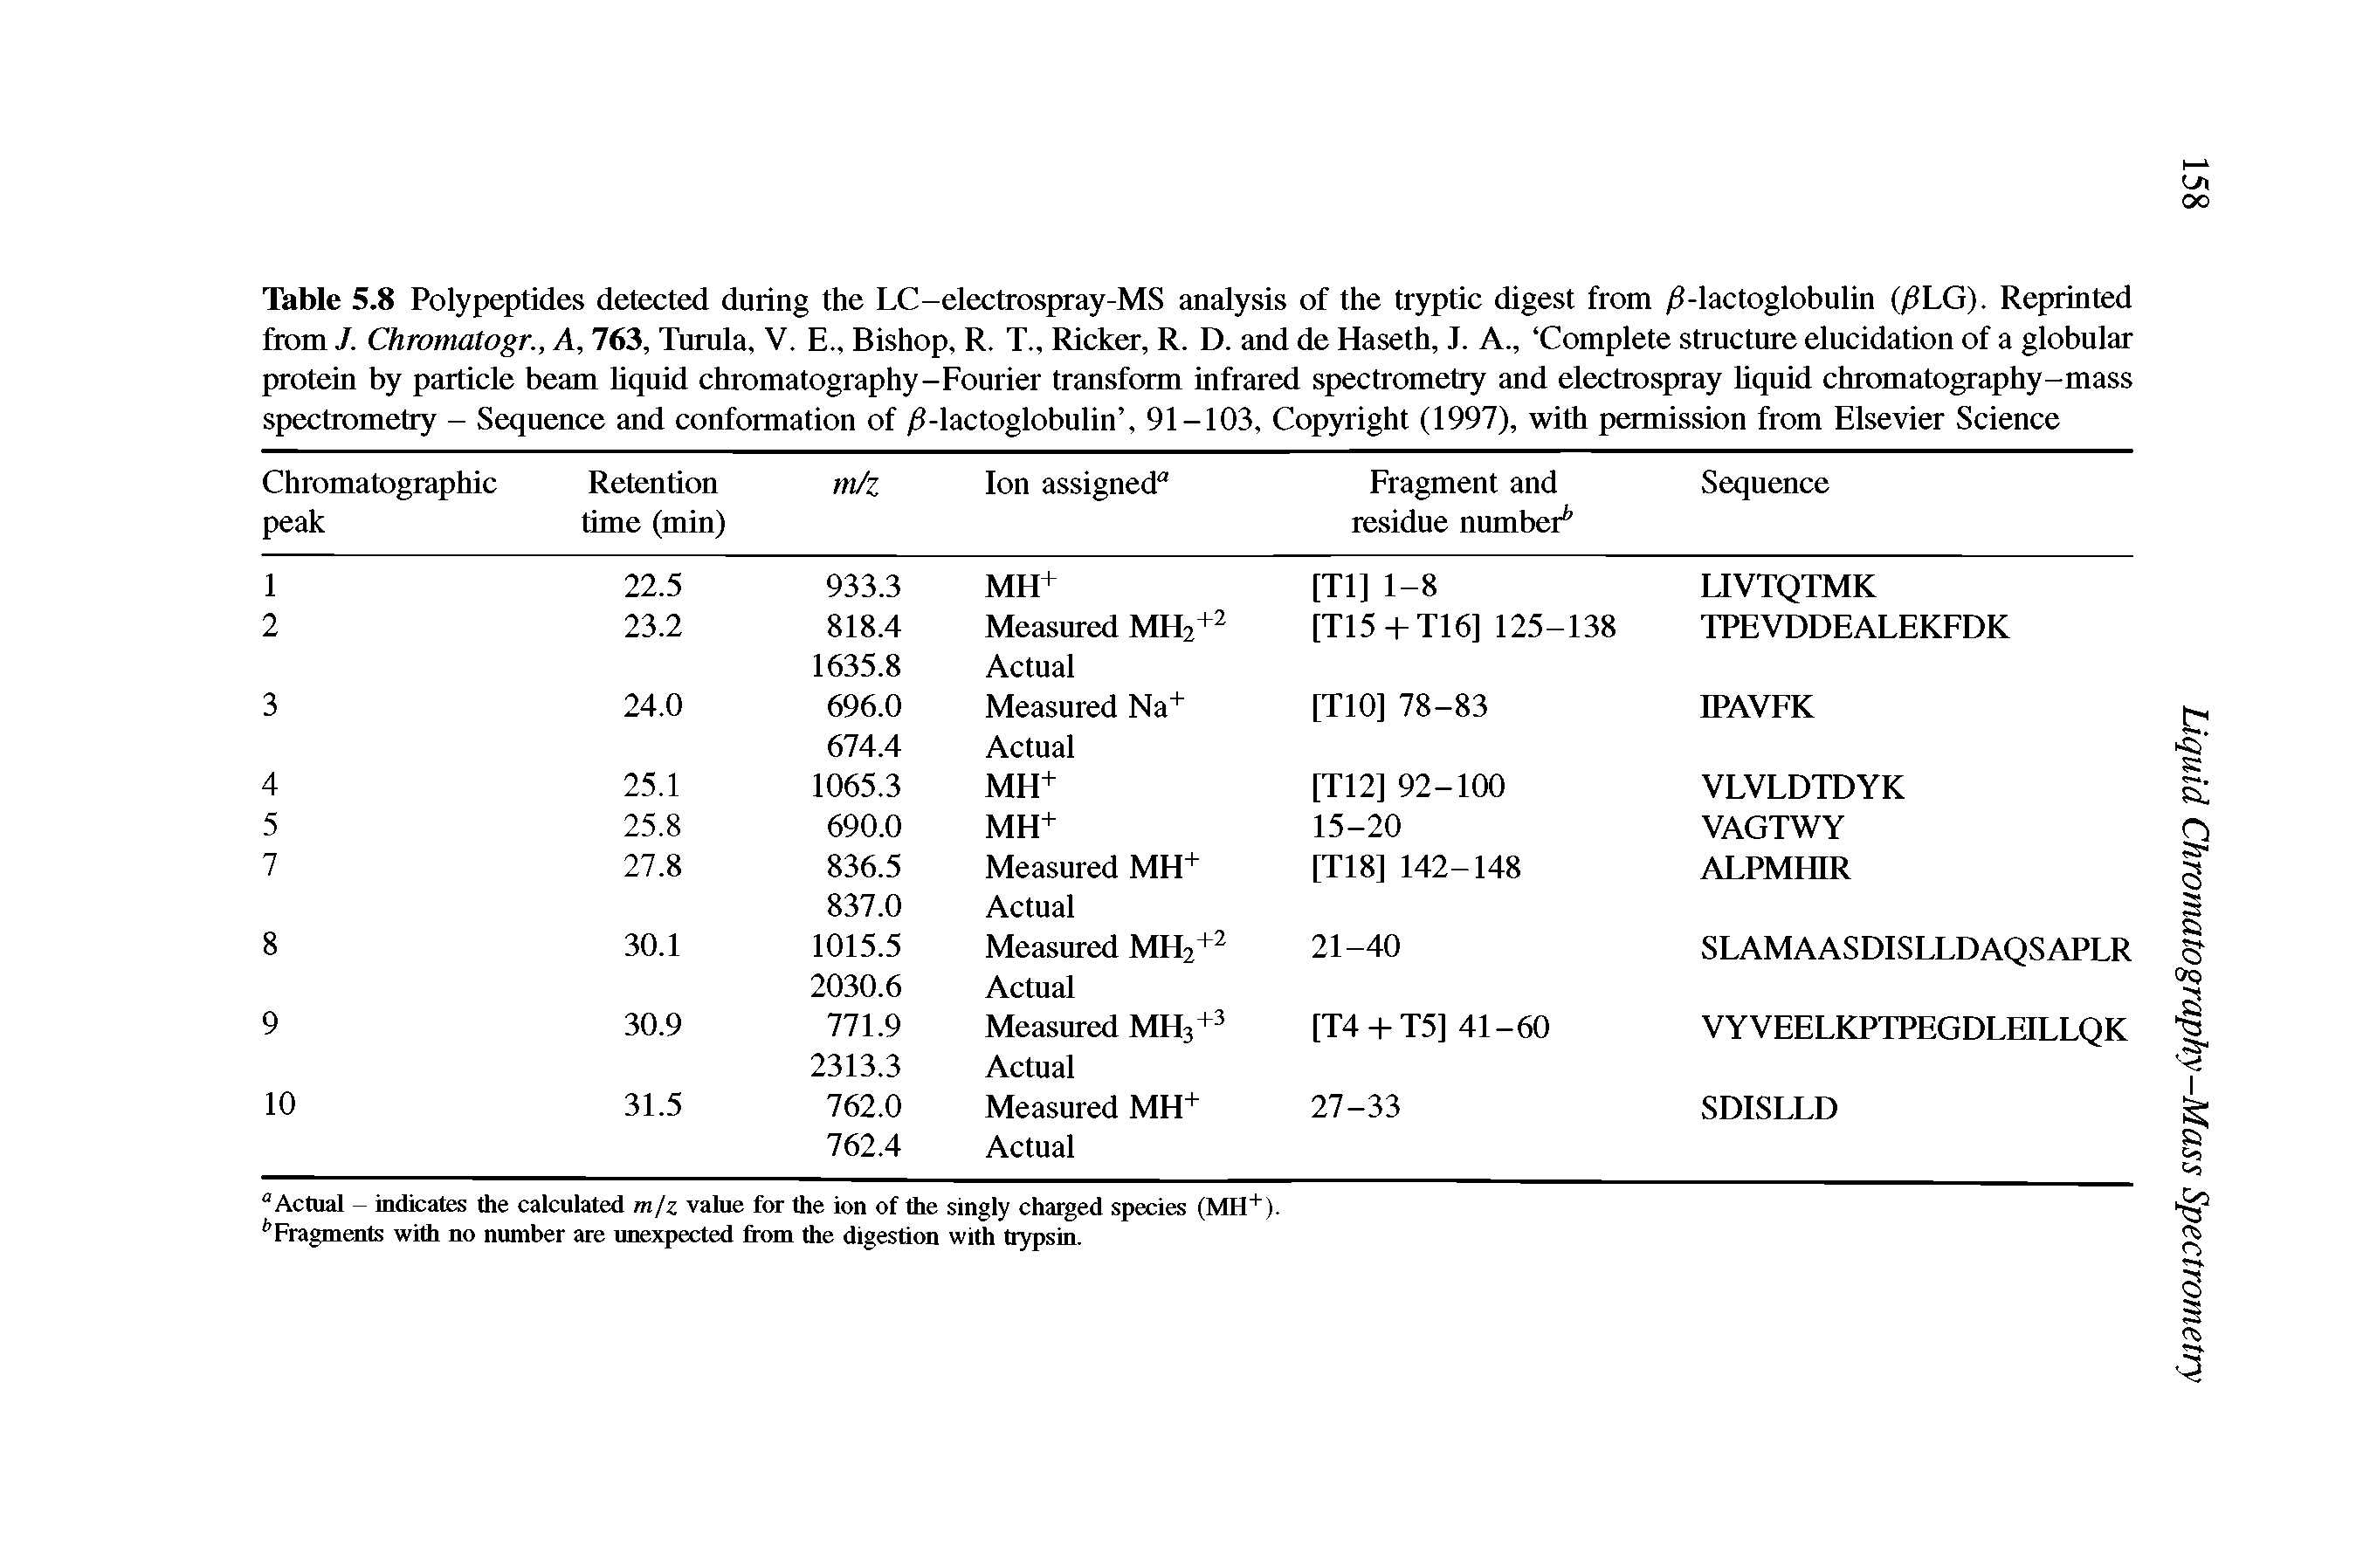 Table 5.8 Polypeptides detected during the LC-electrospray-MS analysis of the tryptic digest from /Mactoglobulin ifiLG). Reprinted from J. Chromatogr., A, 763, Turula, V. E., Bishop, R. T., Ricker, R. D. and de Haseth, J. A., Complete structure elucidation of a globular protein by particle beam liquid chromatography-Fourier transform infrared spectrometry and electrospray liquid chromatography-mass spectrometry - Sequence and conformation of /Mactoglobulin , 91-103, Copyright (1997), with permission from Elsevier Science...